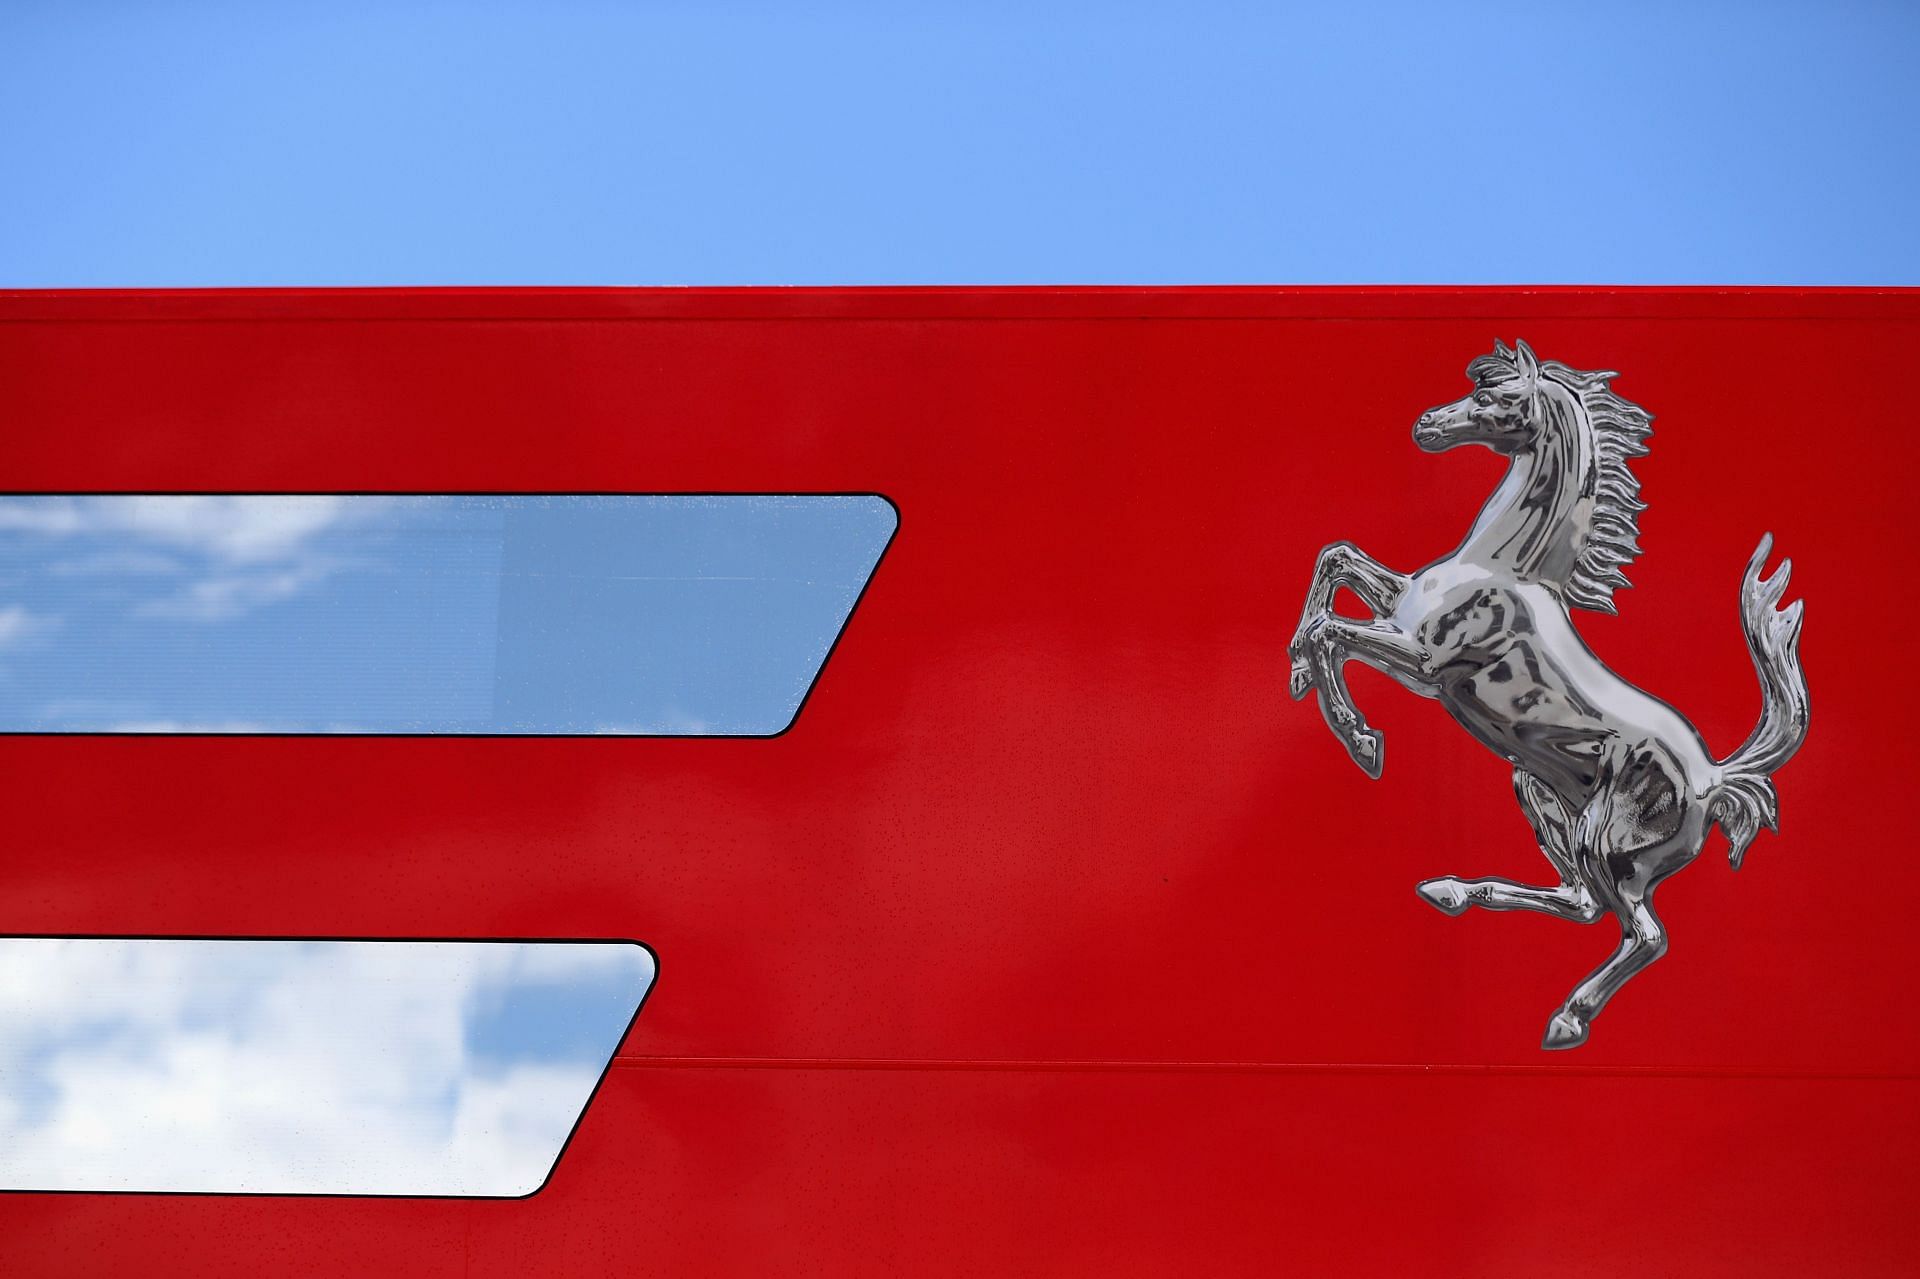 A Ferrari logo in the F1 Paddock at Circuit de Catalunya in Montmelo, Spain. (Photo by Mark Thompson/Getty Images)